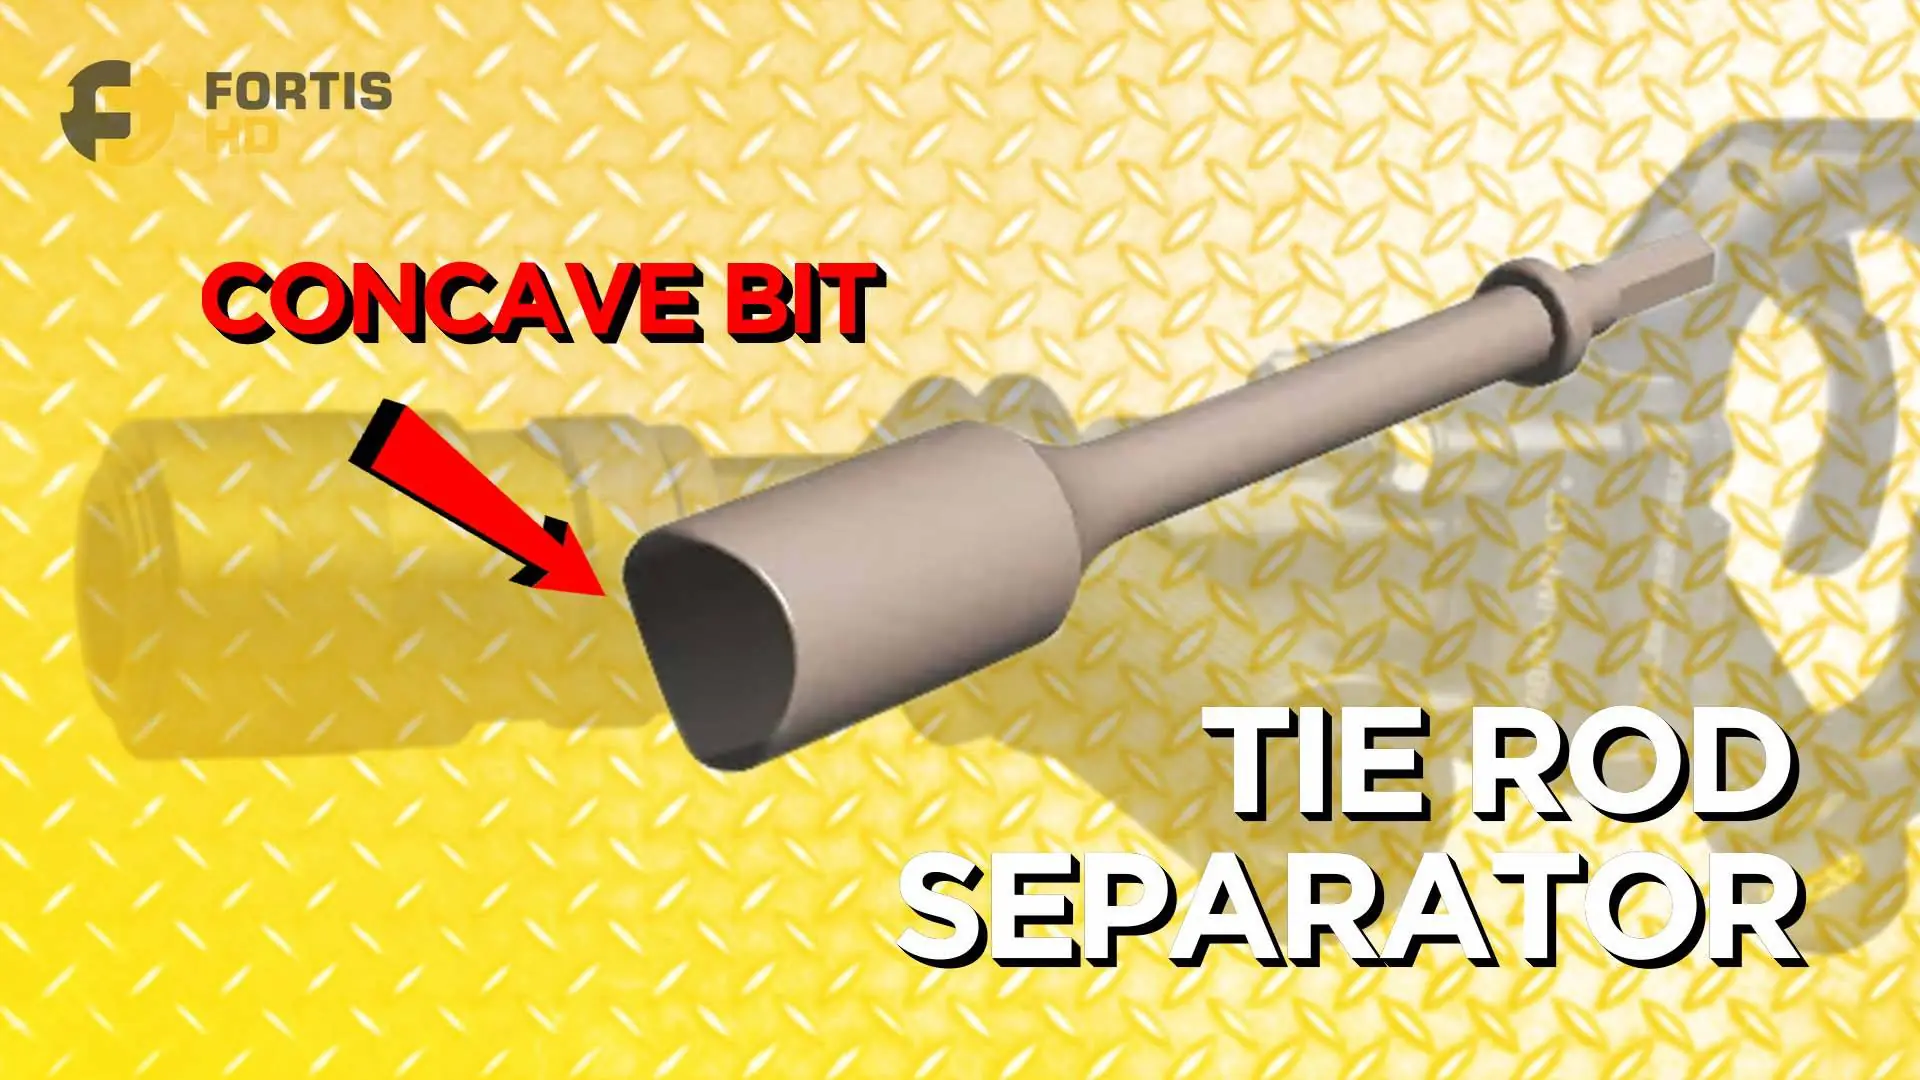 An arrow shows the concave bit of the Mueller Kueps tie rod separator.